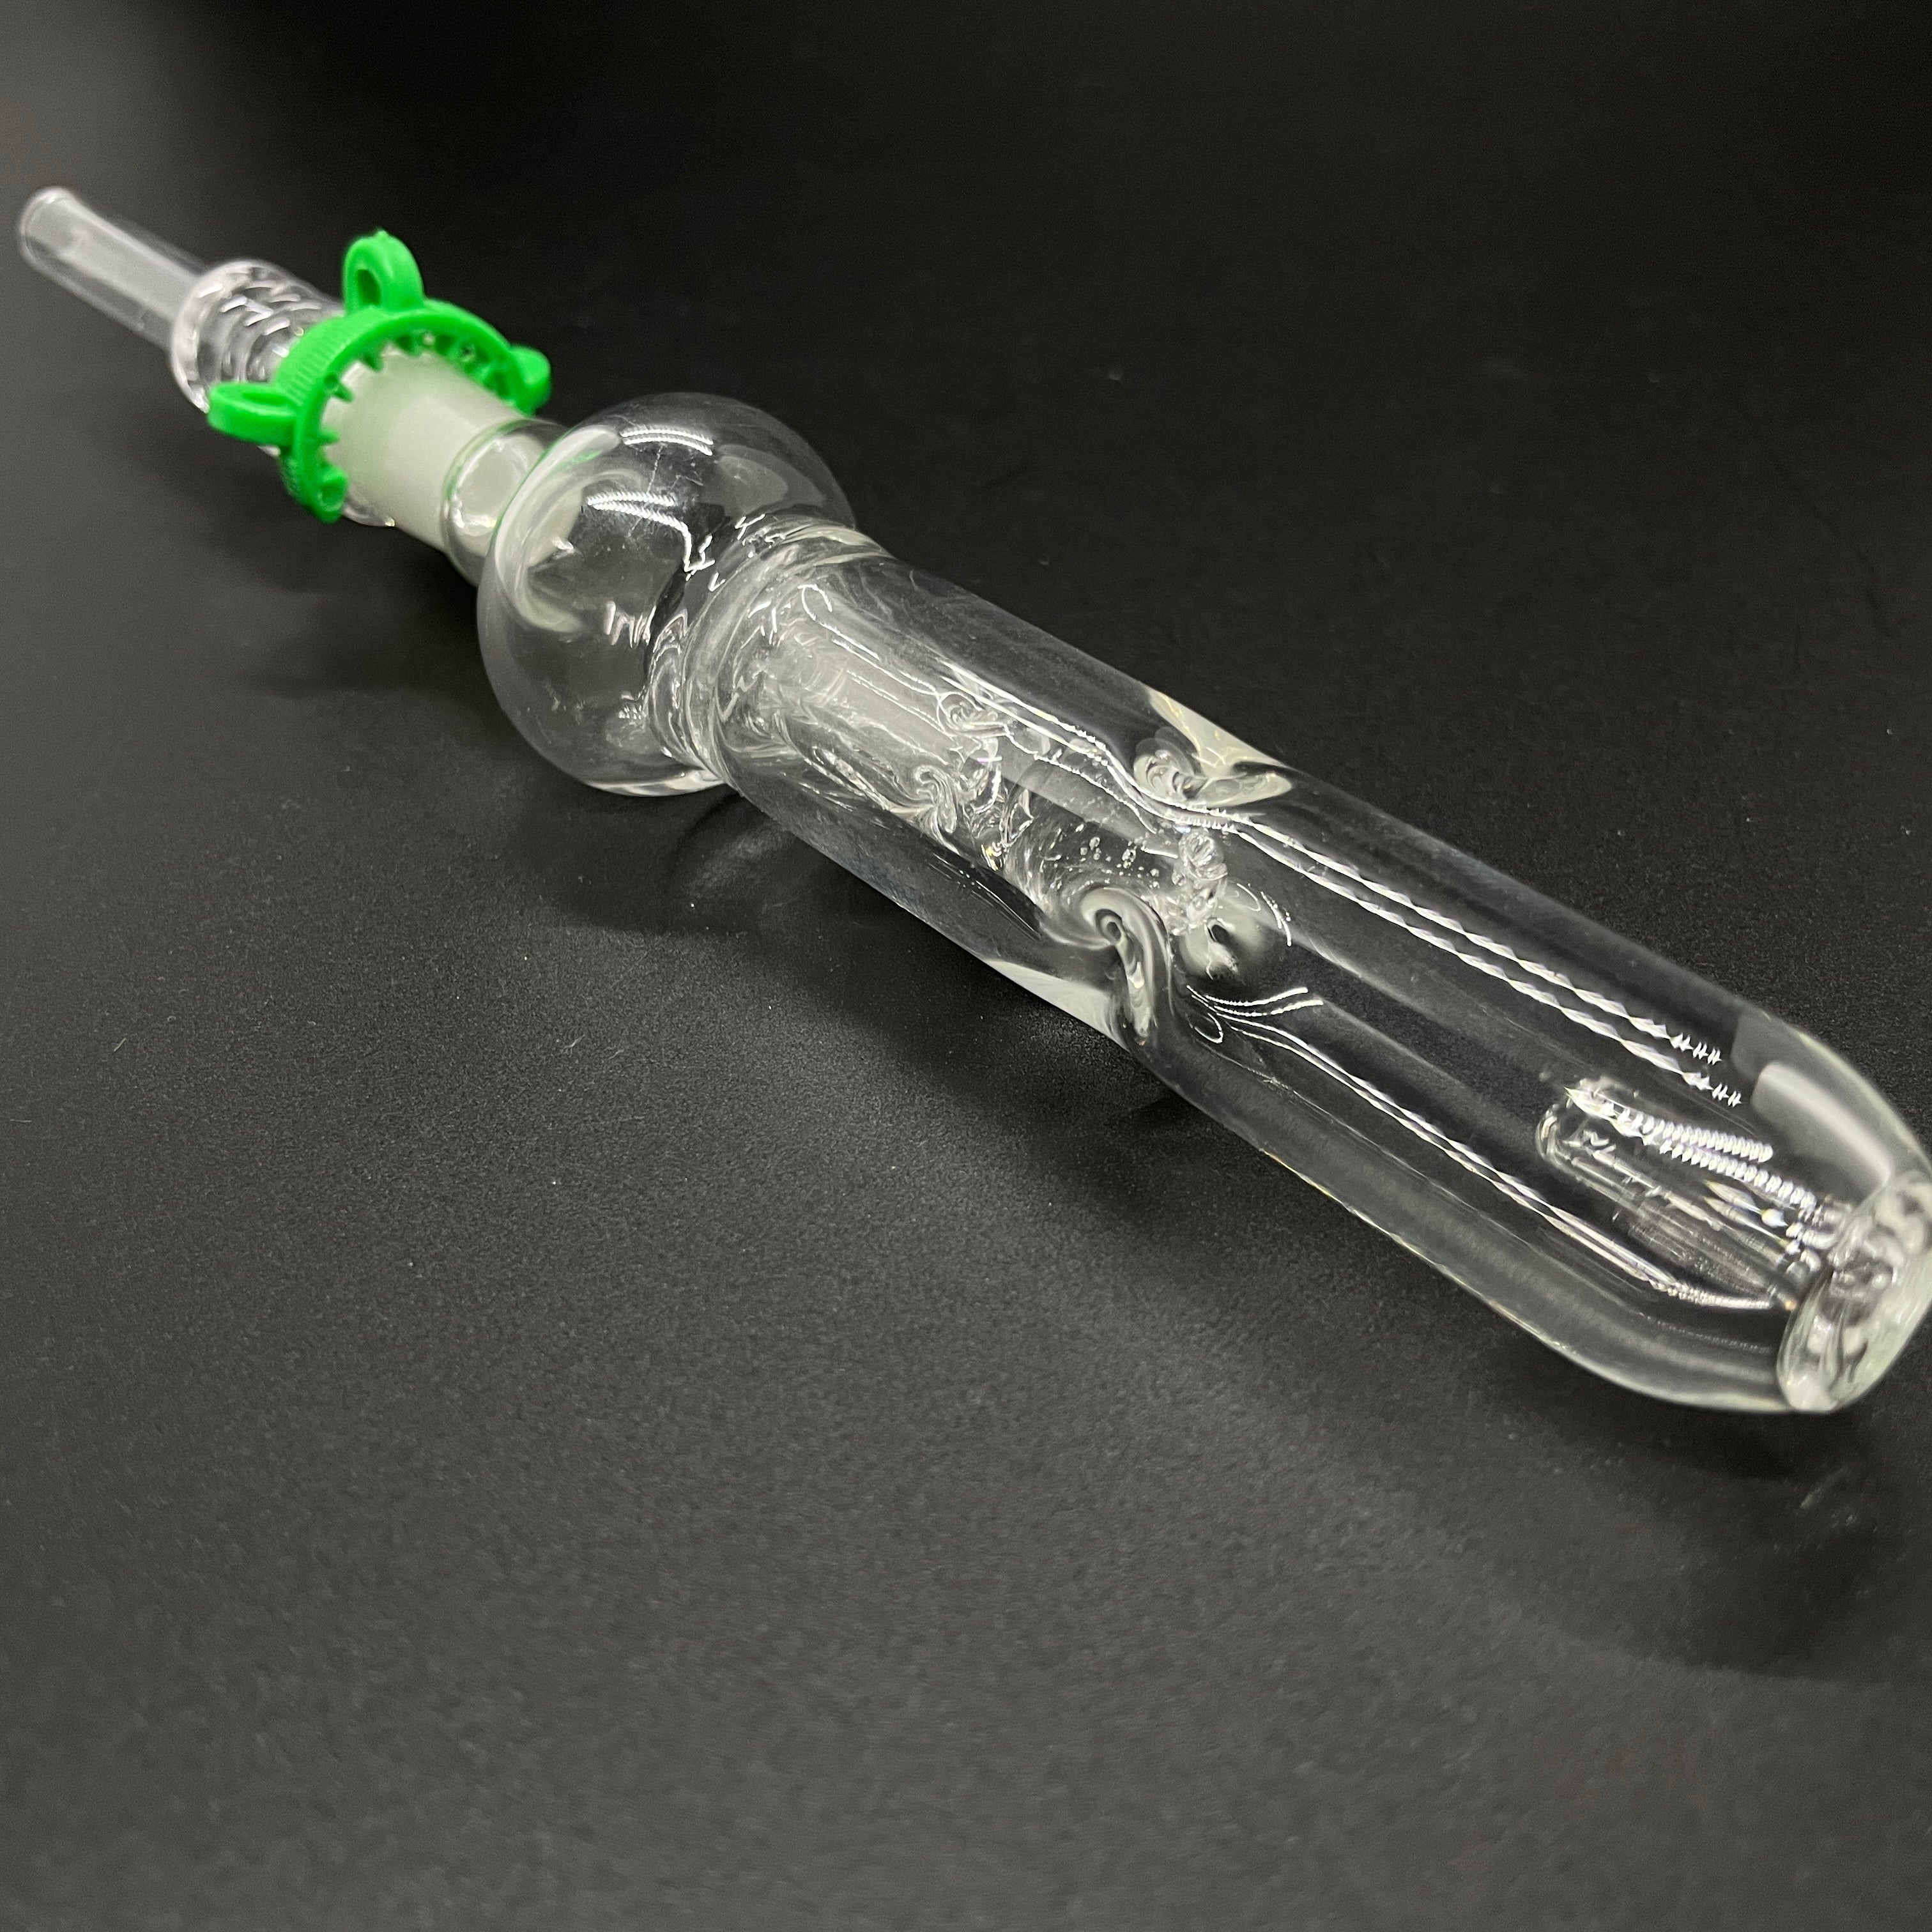 Mini Nectar Collector Dab Straw – Myxed Up Creations, Glass Pipes, Vaporizers, E-Cigs, Detox